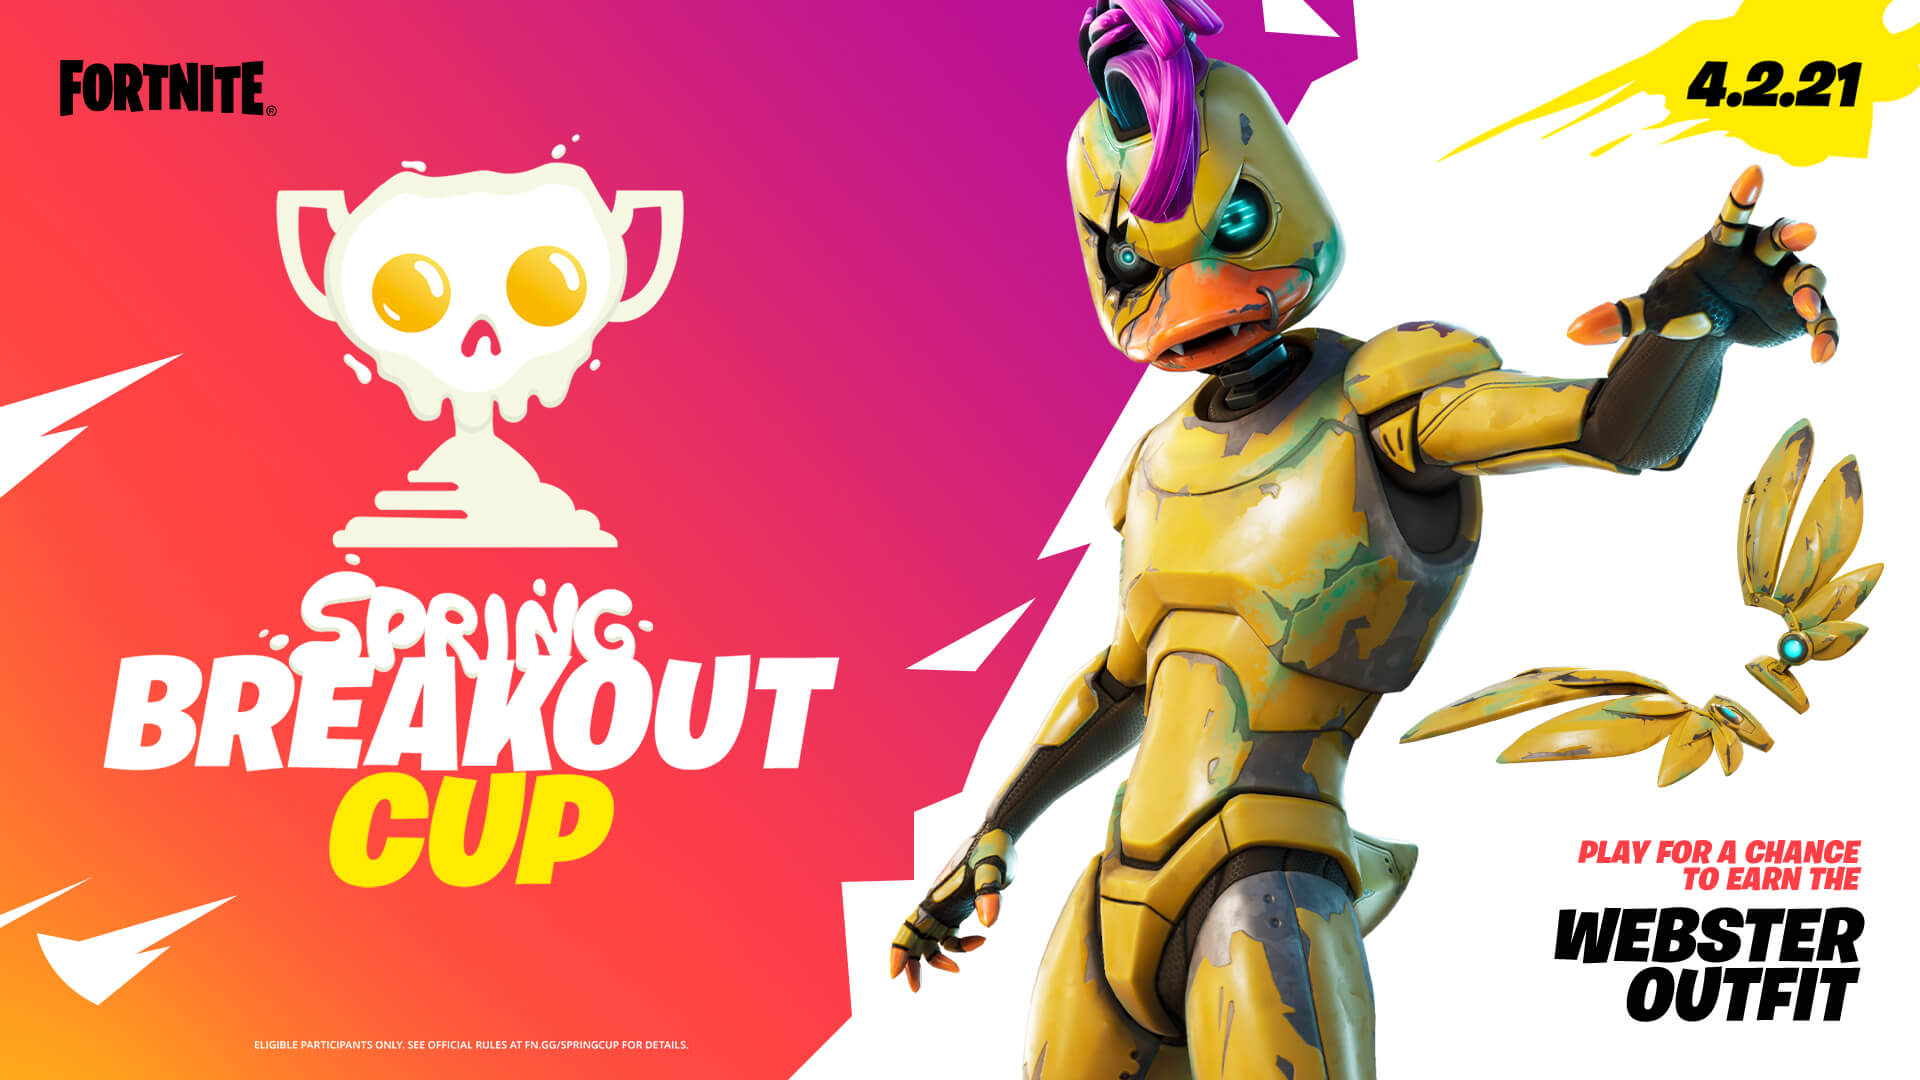 Fortnite Spring Breakout Cup Start Time And How To Get The Webster Skin Early